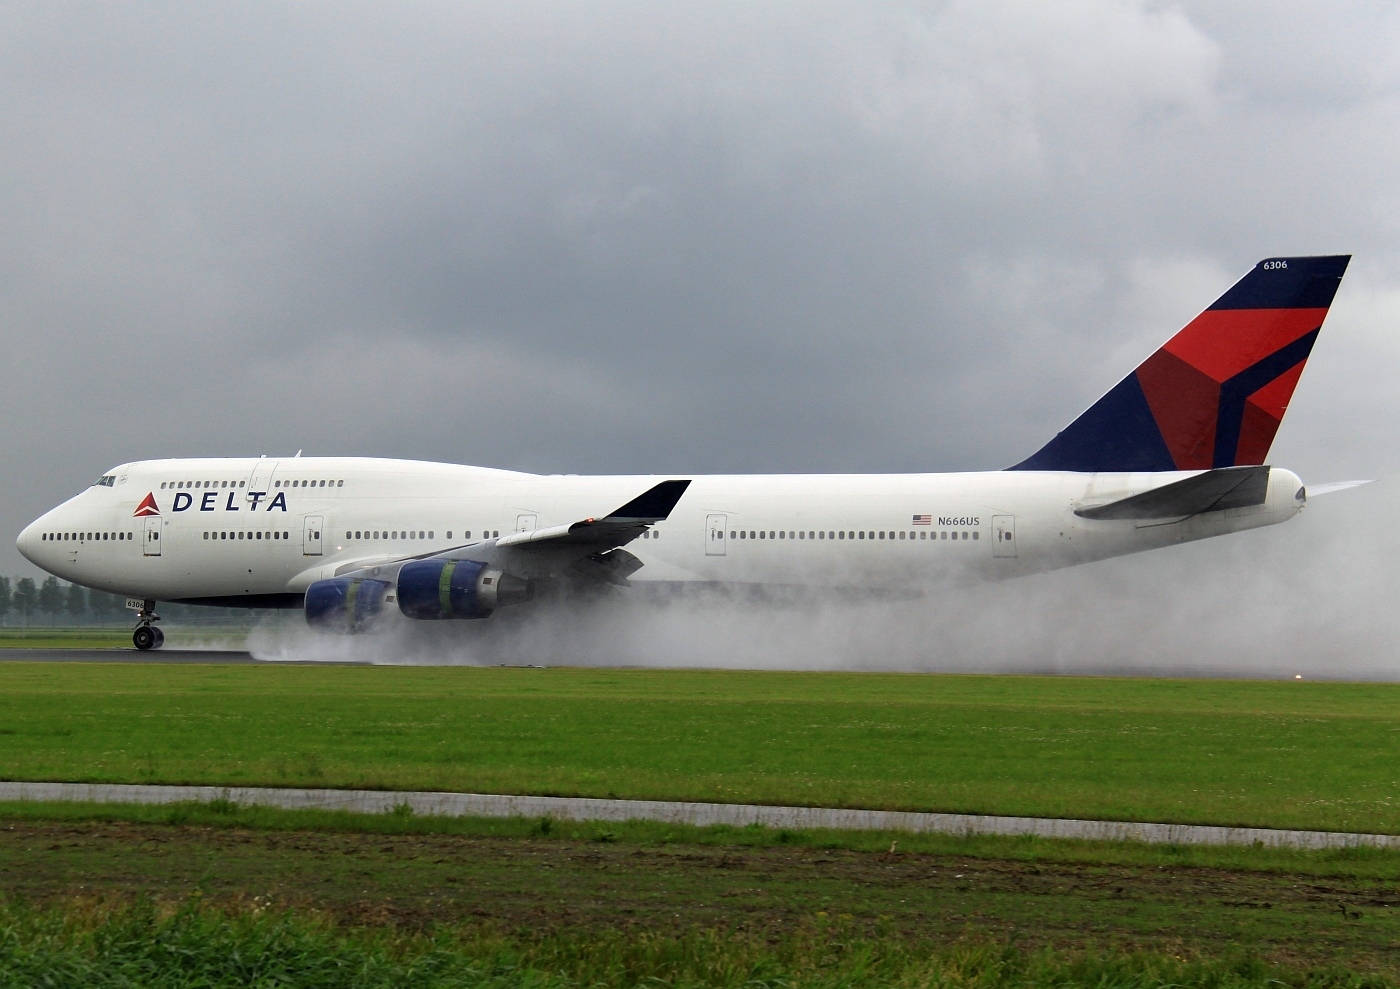 Delta Airlines Airplane Smoke On Grass Field Wallpaper